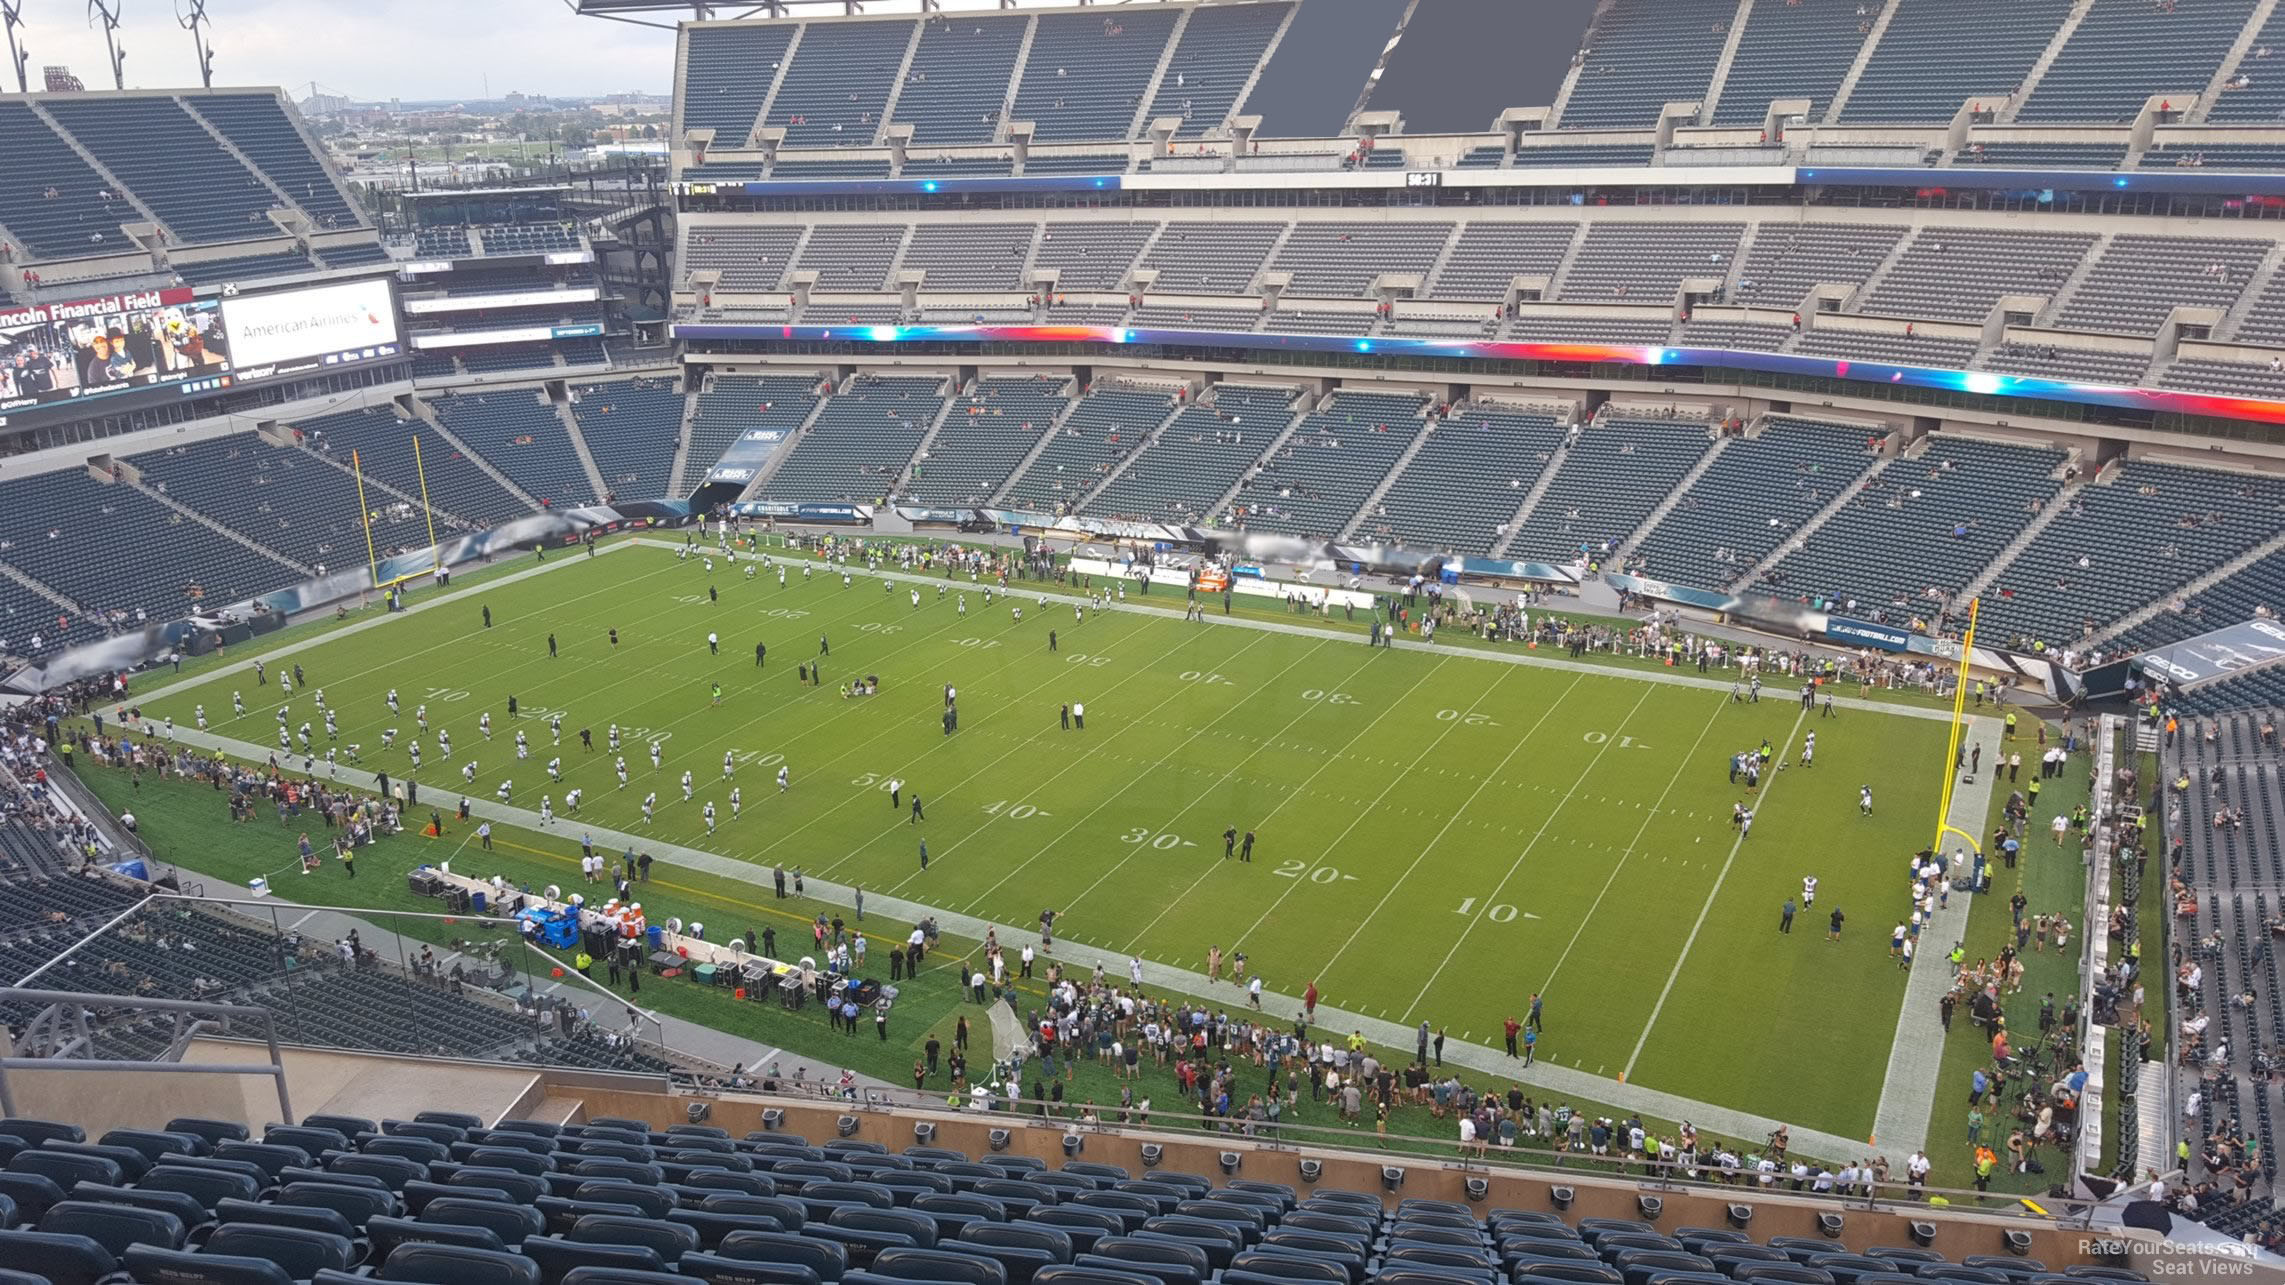 section 205, row 15 seat view  for football - lincoln financial field